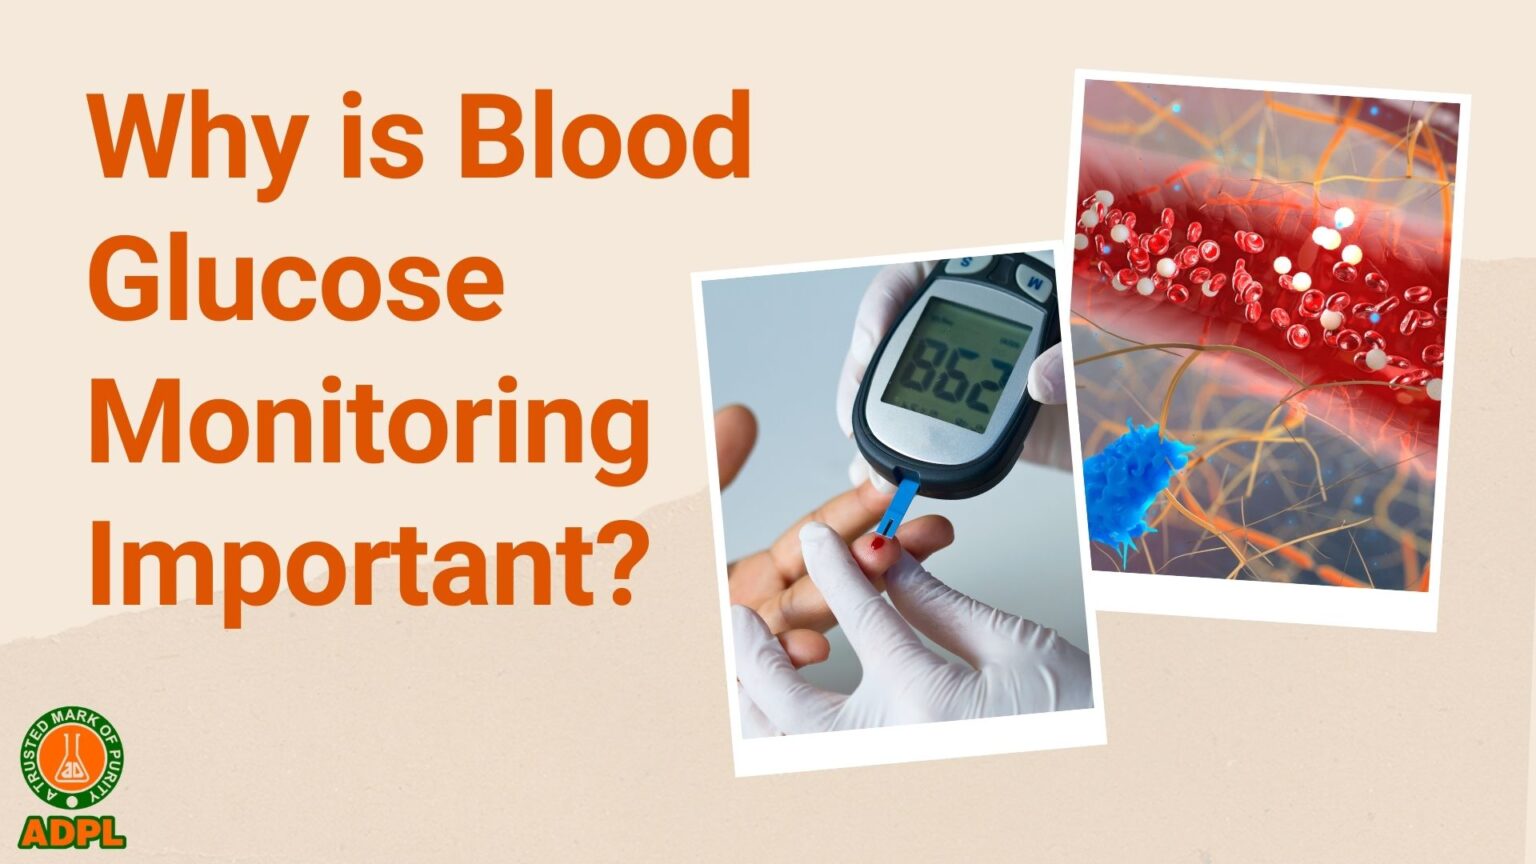 Why is Blood Glucose Monitoring Important?